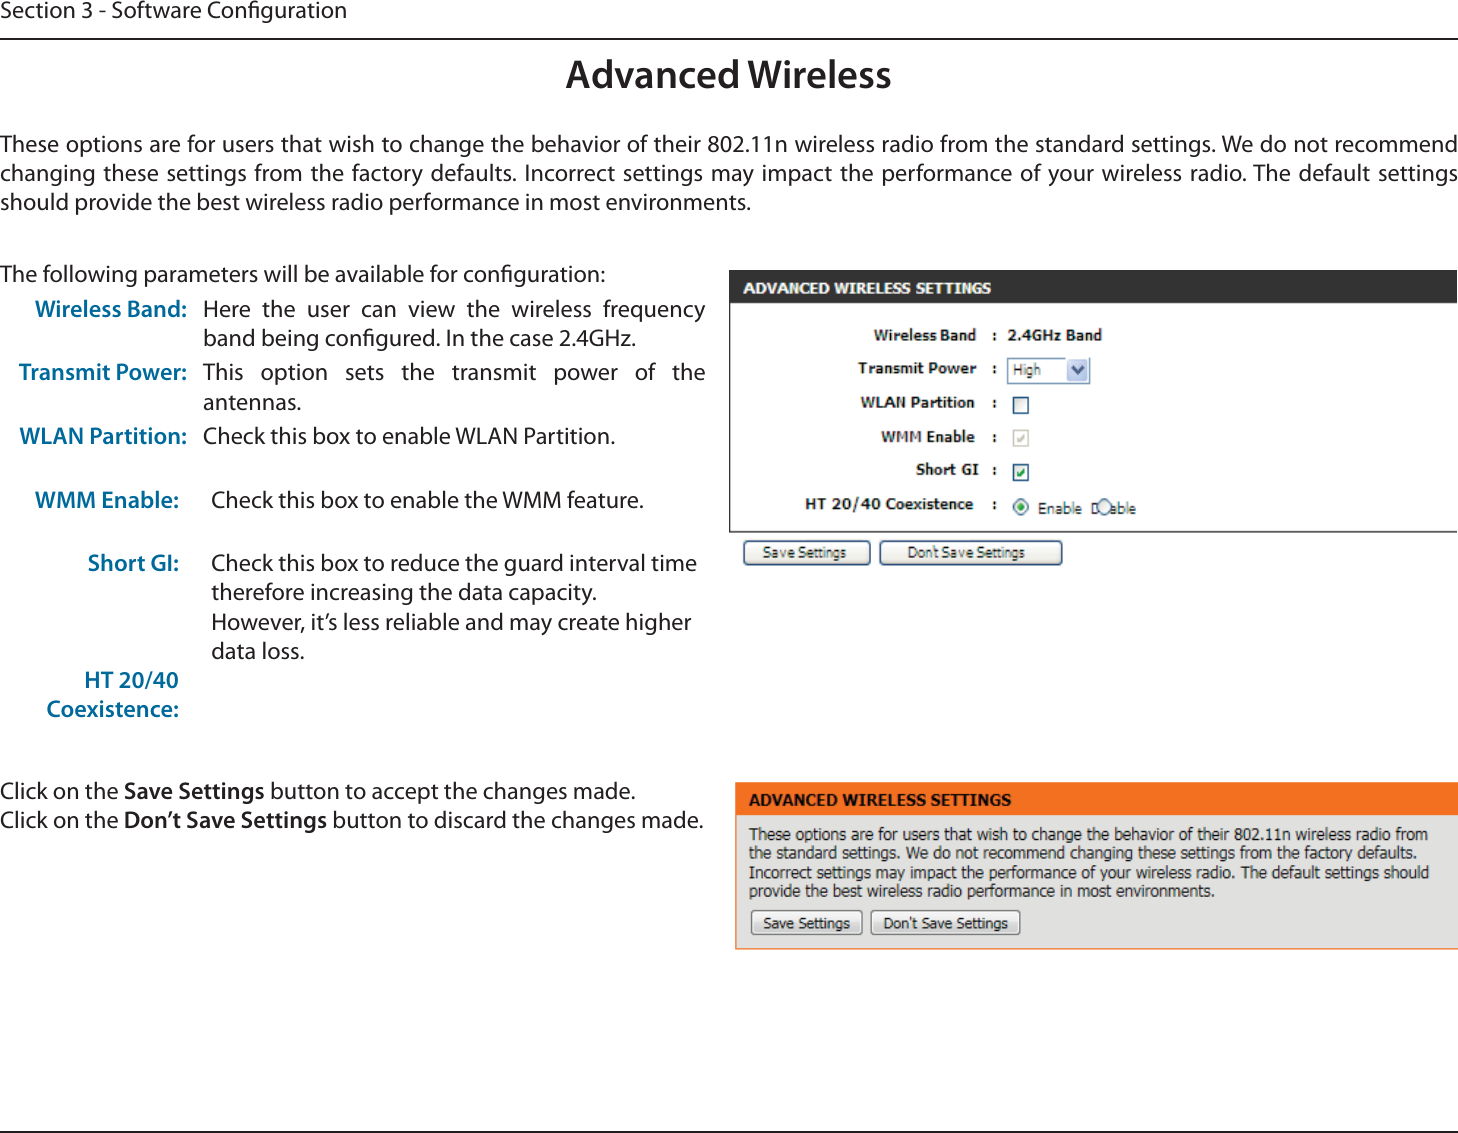 Section 3 - Software CongurationAdvanced WirelessThese options are for users that wish to change the behavior of their 802.11n wireless radio from the standard settings. We do not recommend changing these settings from the factory defaults. Incorrect settings may impact the performance of your wireless radio. The default settings should provide the best wireless radio performance in most environments.The following parameters will be available for conguration:Wireless Band: Here the user can view the wireless frequency band being congured. In the case 2.4GHz.Transmit Power: This option sets the transmit power of the antennas.WLAN Partition:WMM Enable:Short GI:HT 20/40 Coexistence:Check this box to enable WLAN Partition.Check this box to enable the WMM feature.Check this box to reduce the guard interval time therefore increasing the data capacity. However, it’s less reliable and may create higher data loss.Click on the Save Settings button to accept the changes made.Click on the Don’t Save Settings button to discard the changes made.